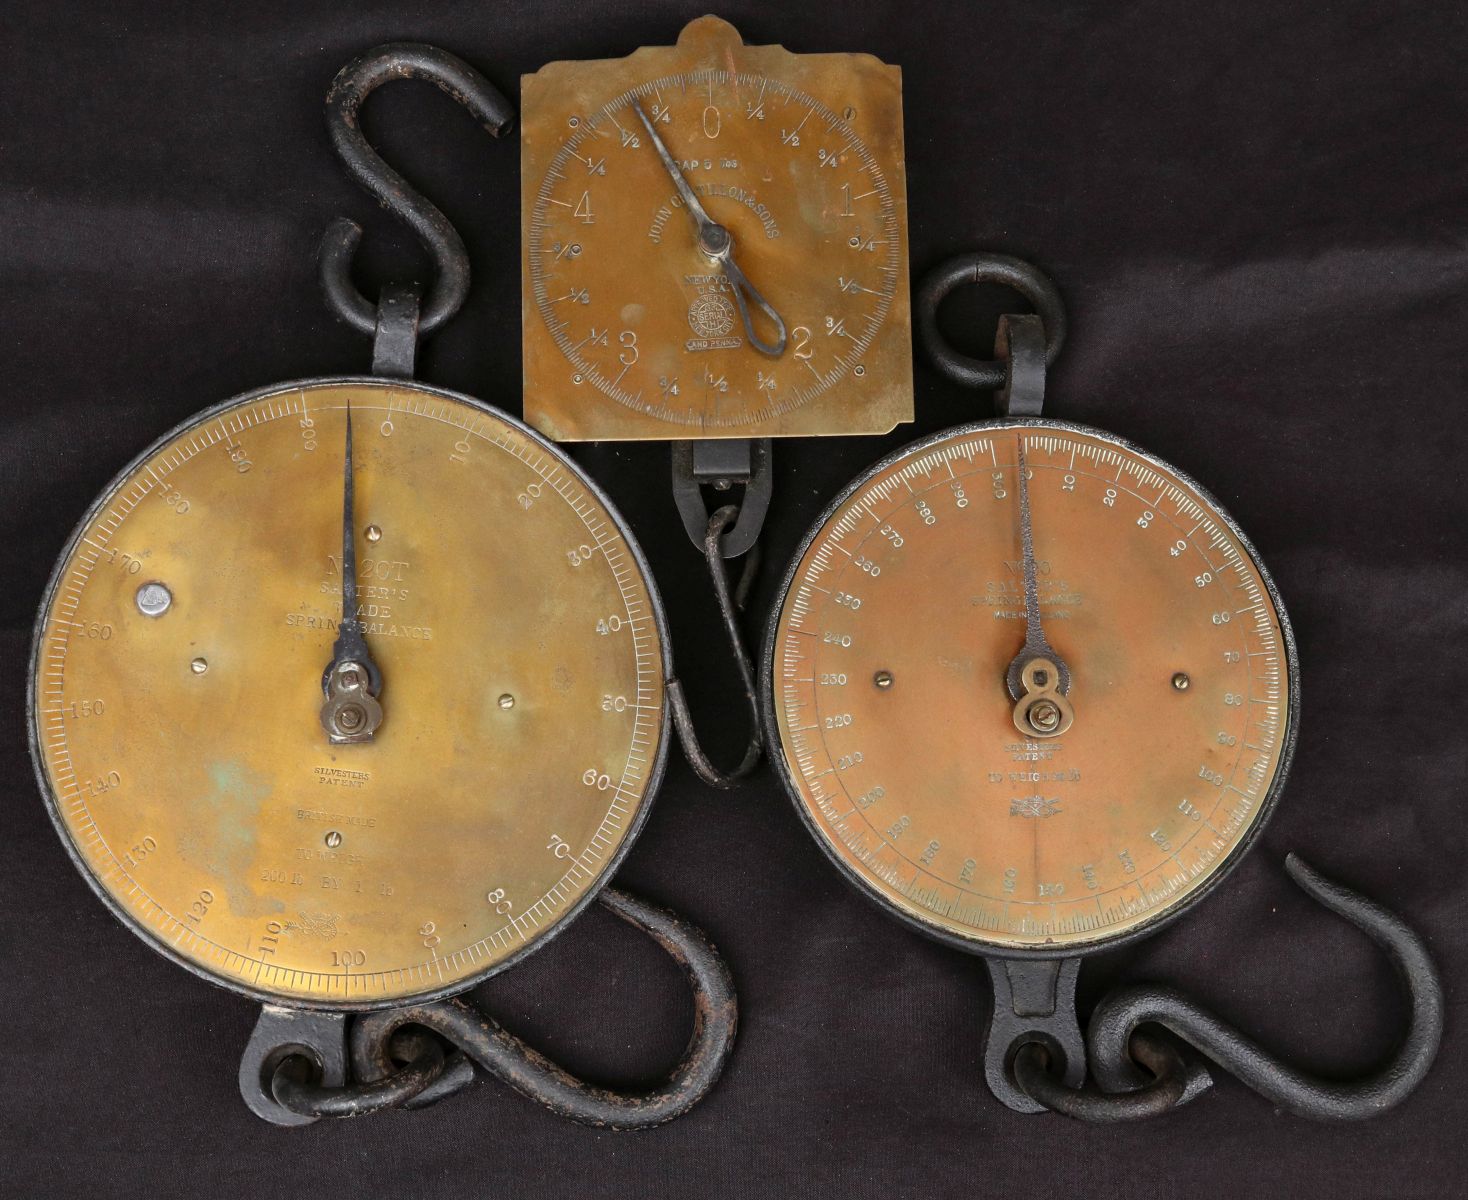 THREE UNUSUAL LATE 19TH CENTURY BRASS FRONT SCALES